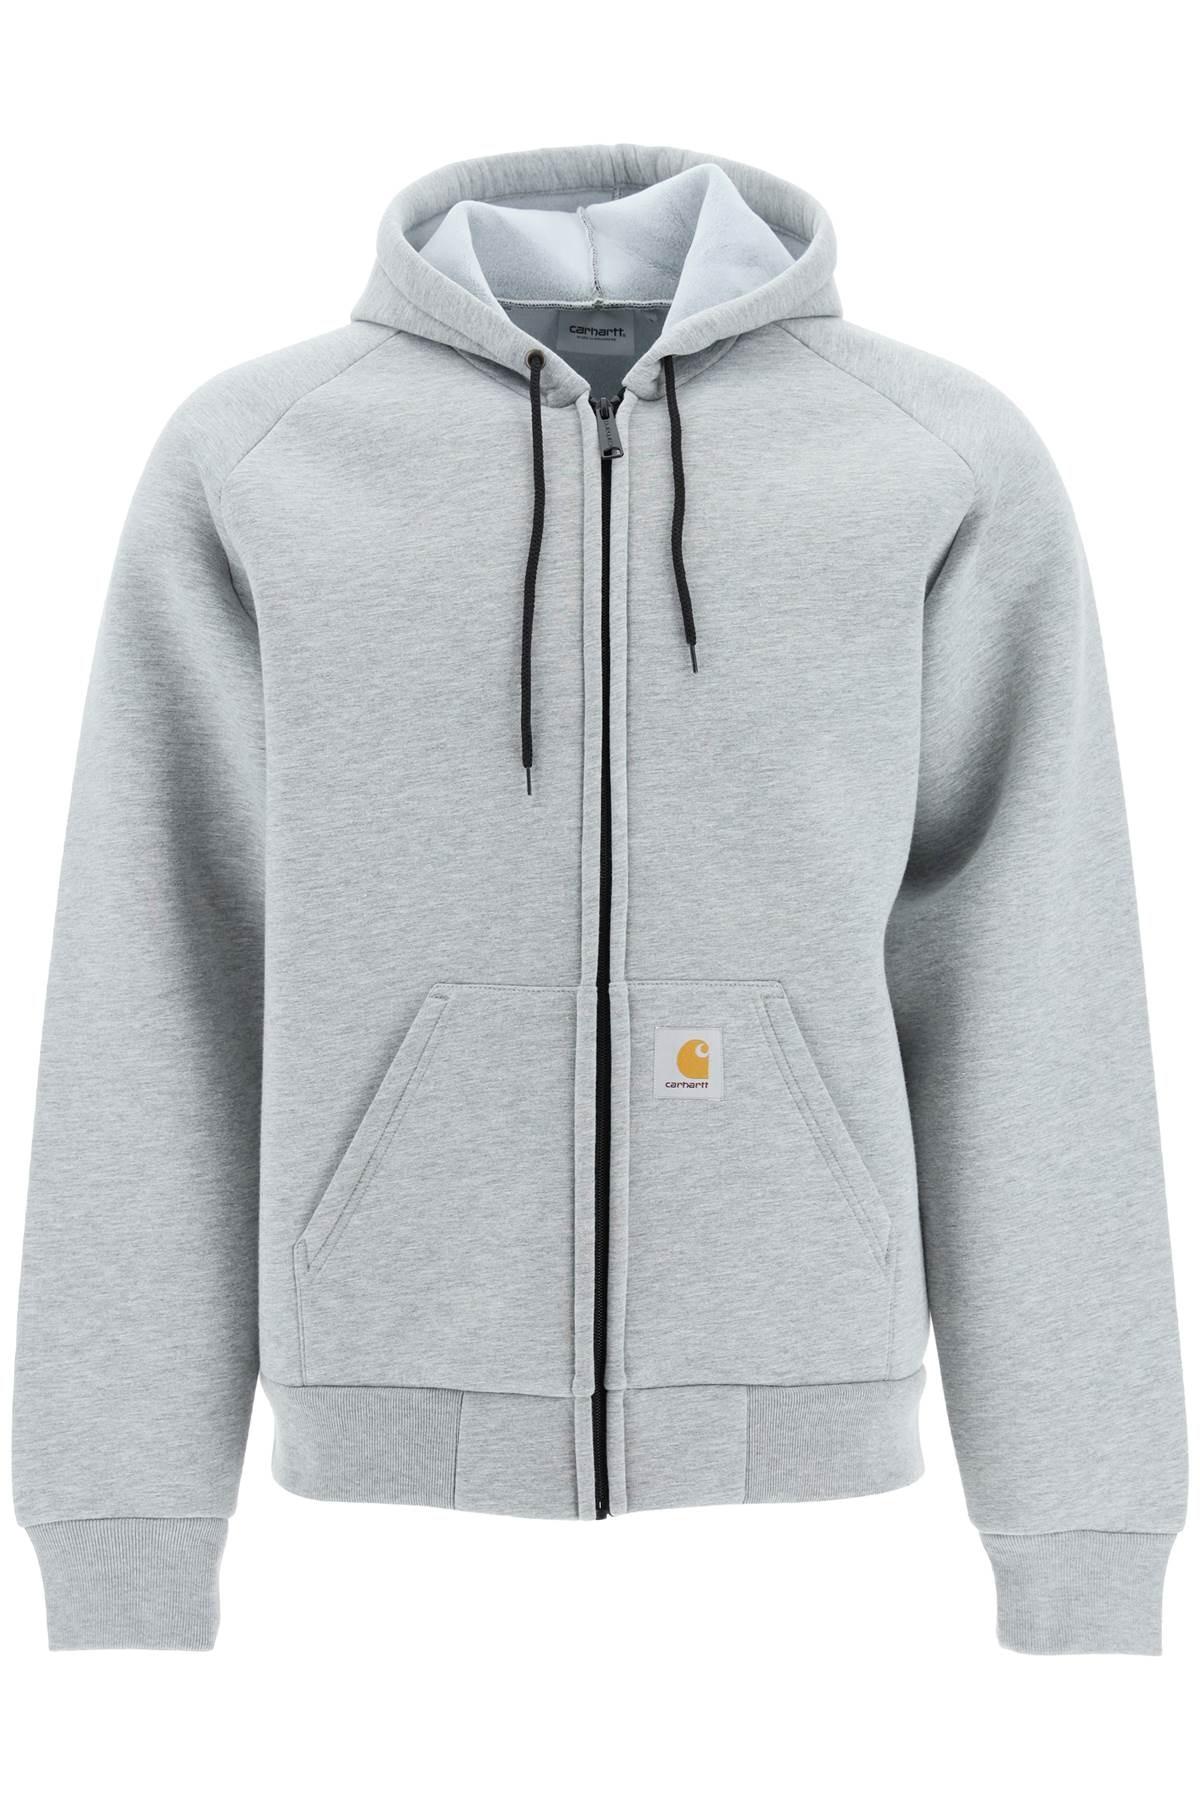 tilfredshed Ministerium aflevere Carhartt WIP Car-lux Full Zip Hoodie-jacket in Gray for Men | Lyst